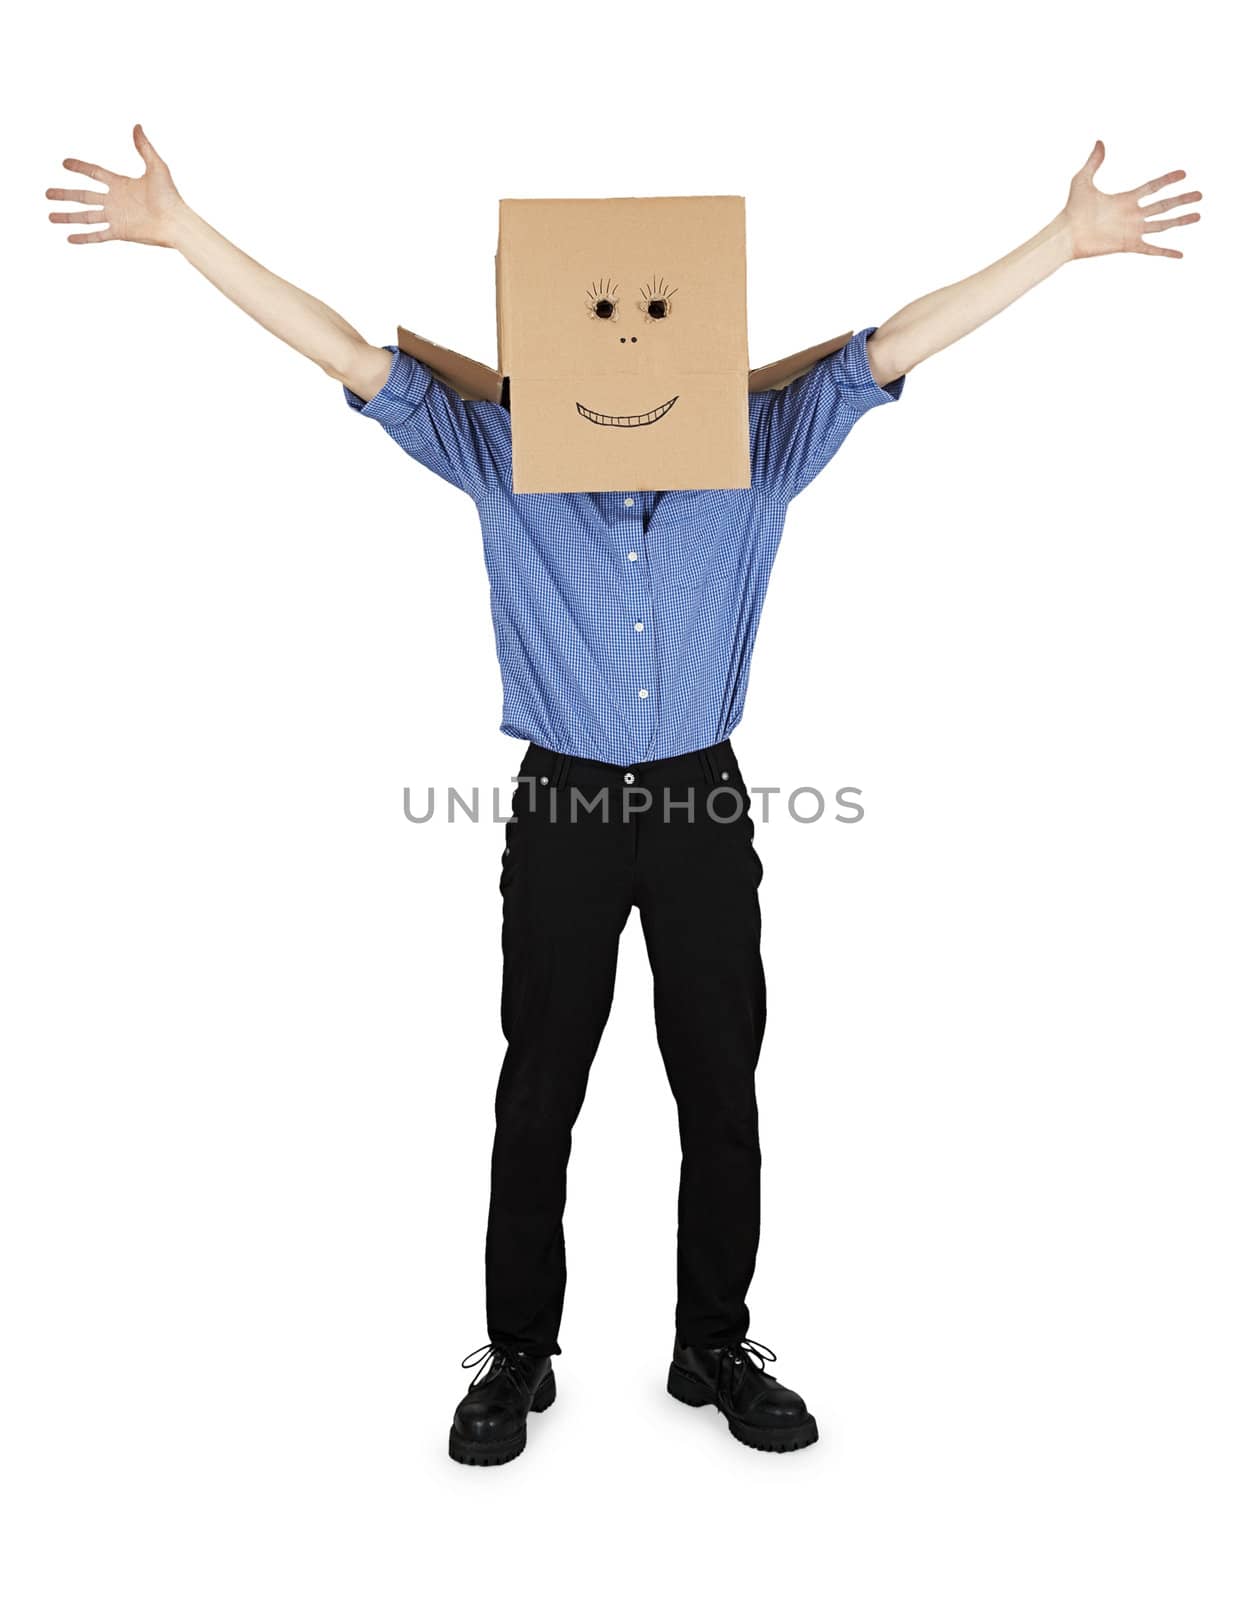 Funny man with a box on his head rejoices on a white background